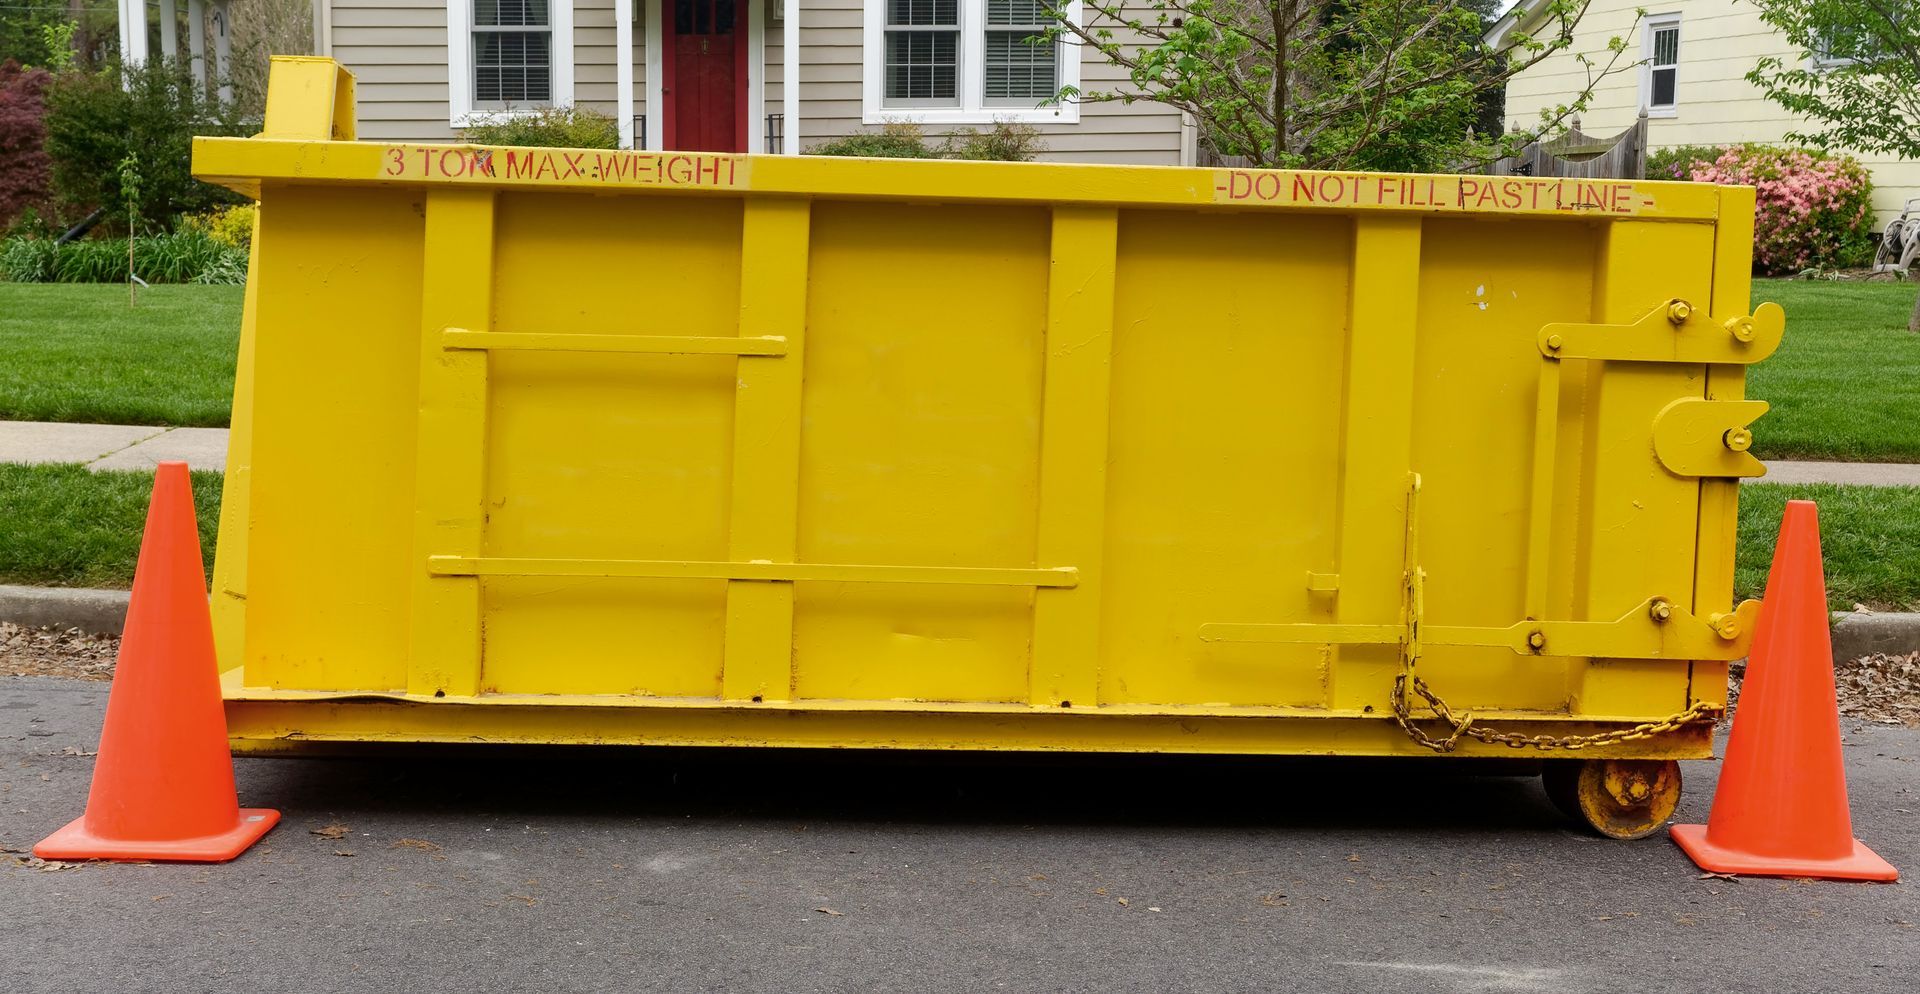 Get more space in dumpster